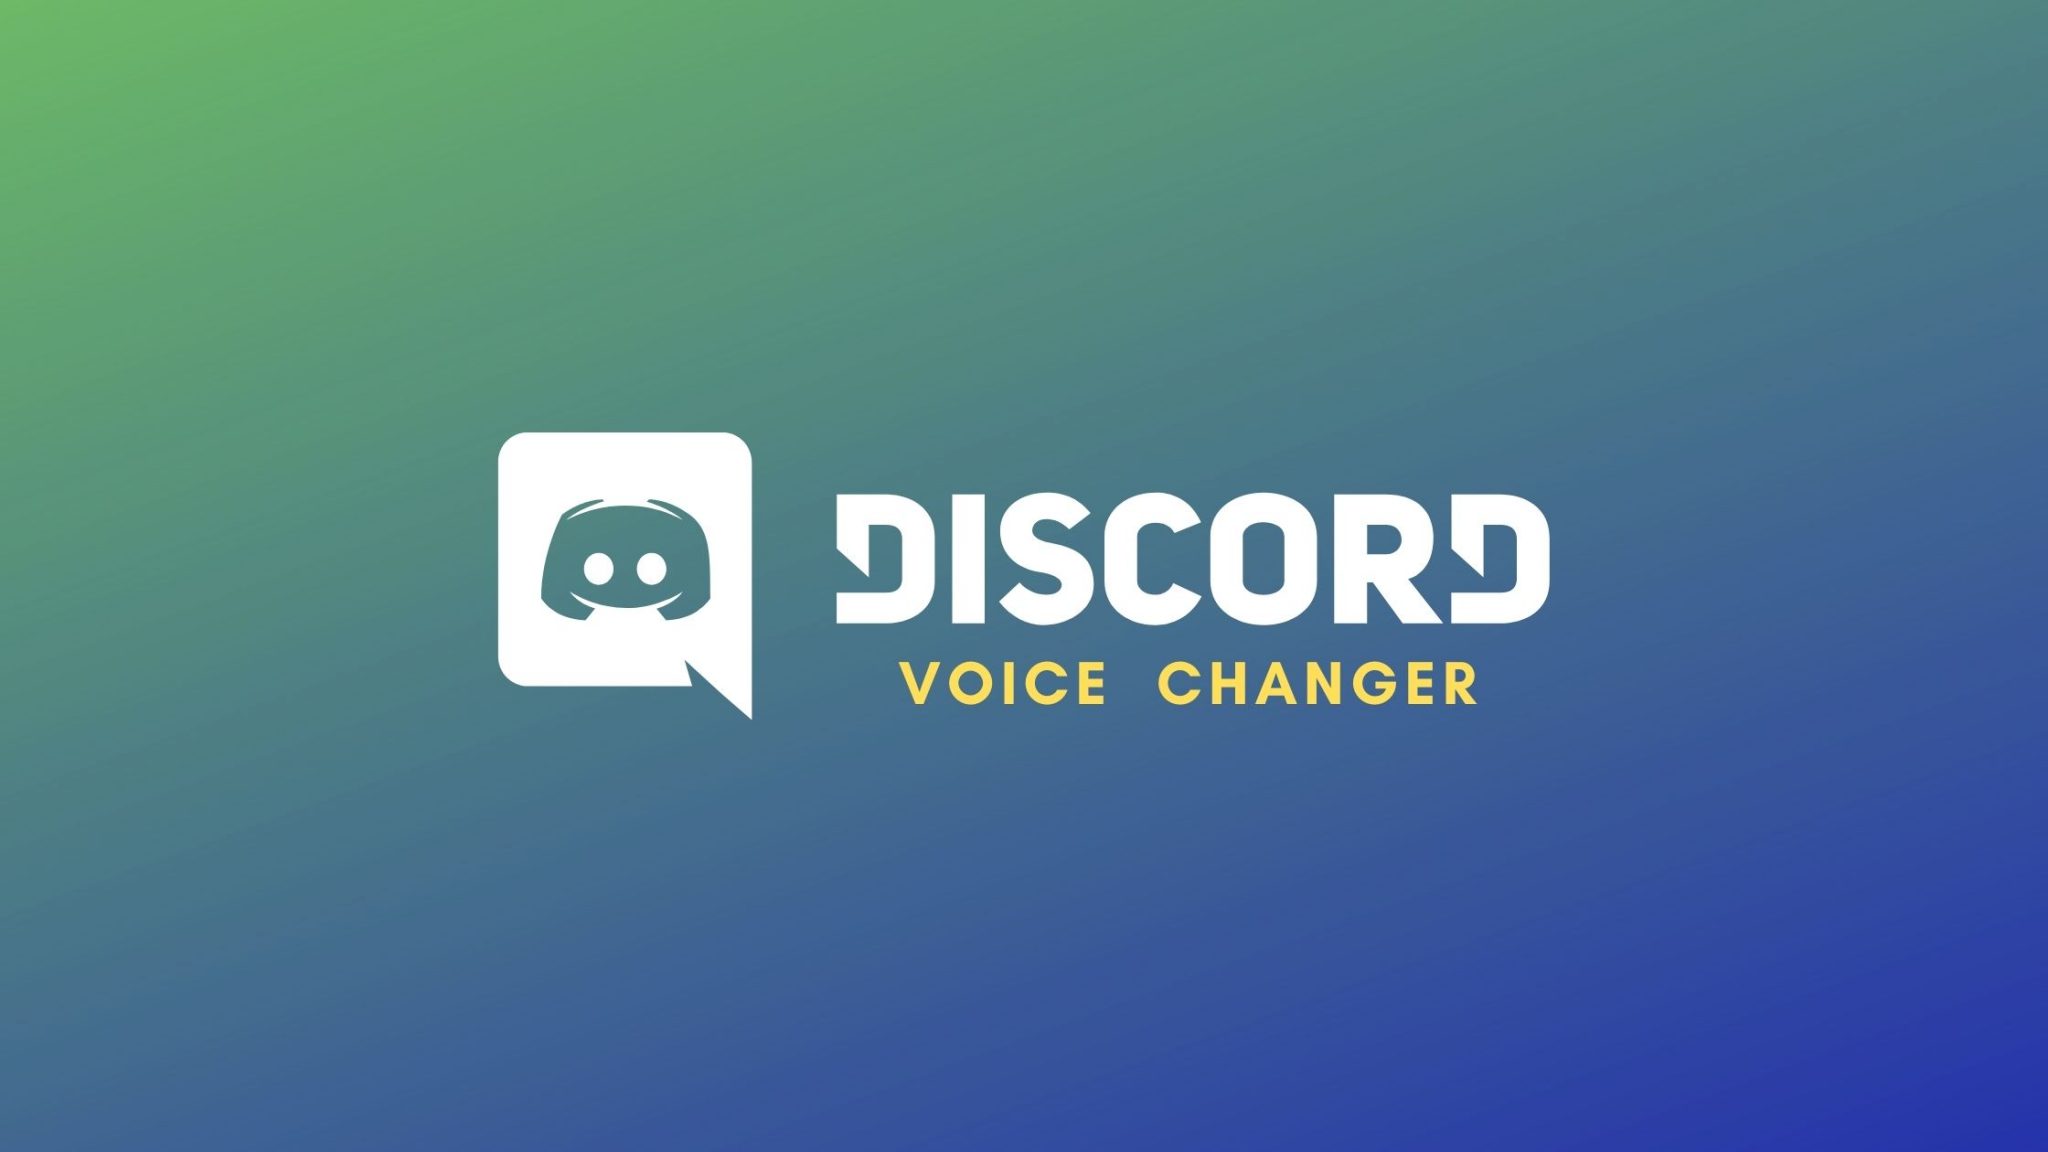 real time voice changer for discord